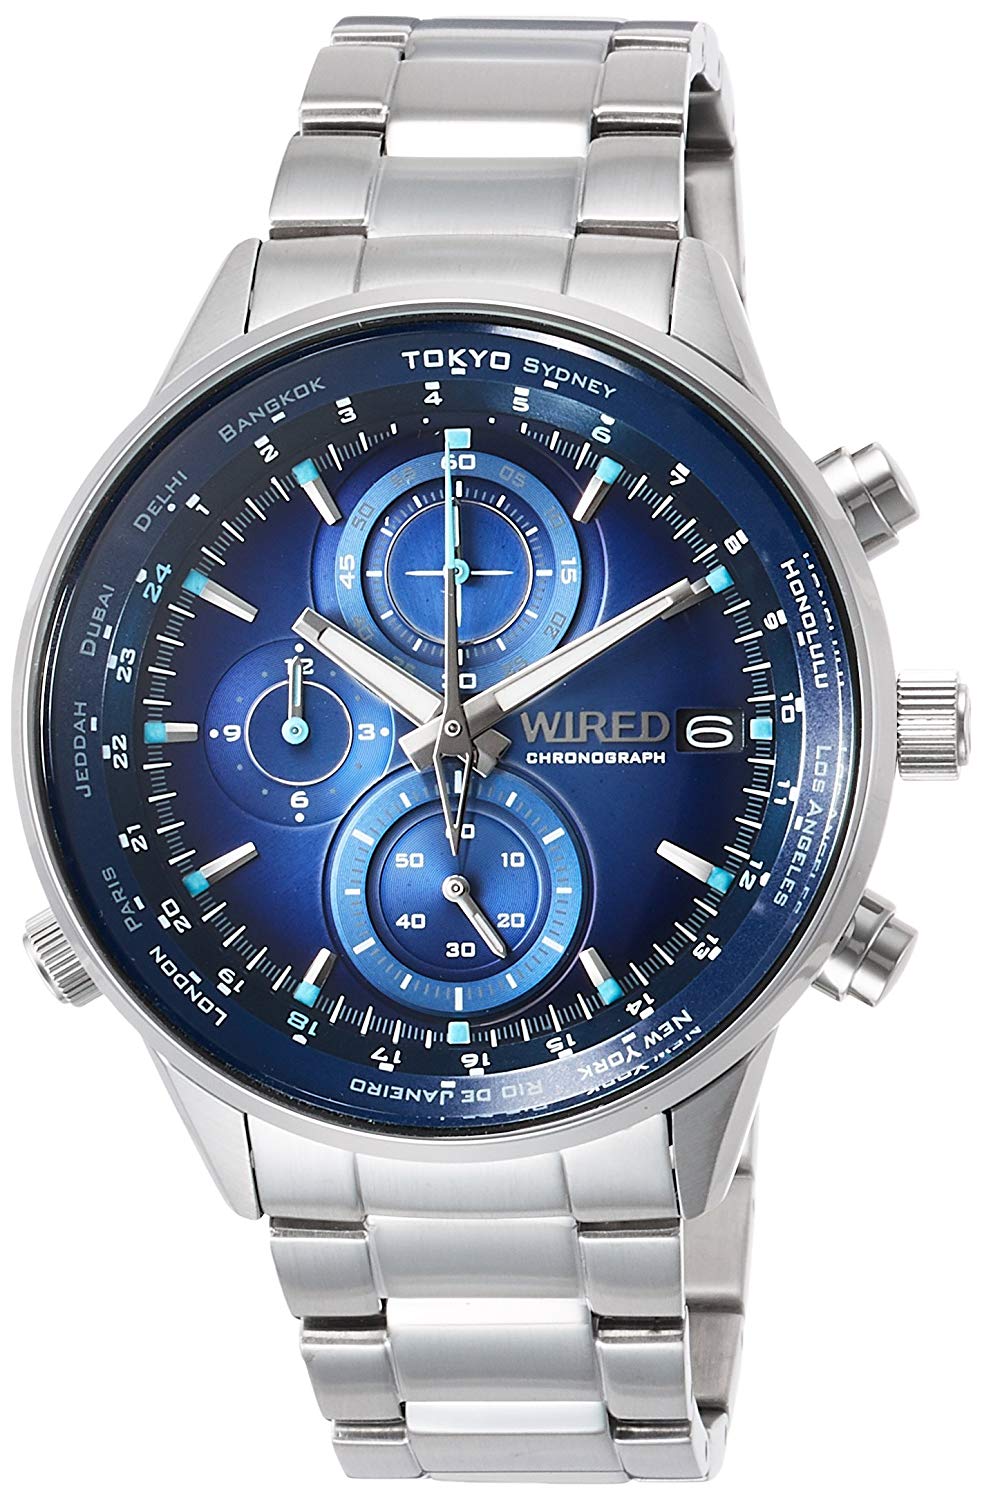 SEIKO Watch Wired Chronograph Blue Dial AGAW449 Men's Silver - Discovery  Japan Mall